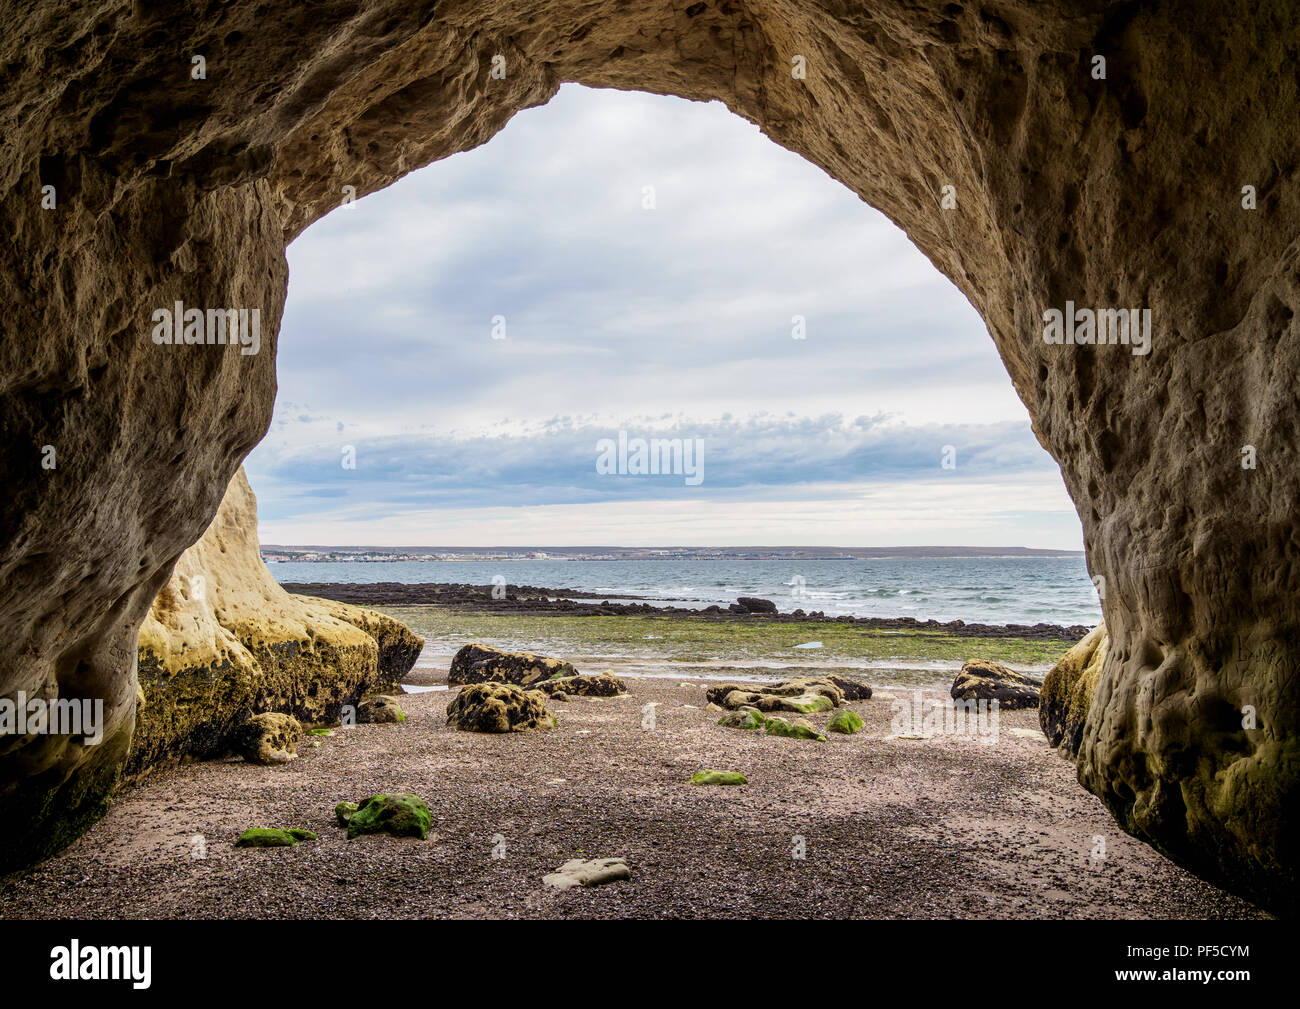 Welsh Landing Place and Caves, Punta Cuevas, Puerto Madryn, The Welsh Settlement, Chubut Province, Patagonia, Argentina Stock Photo